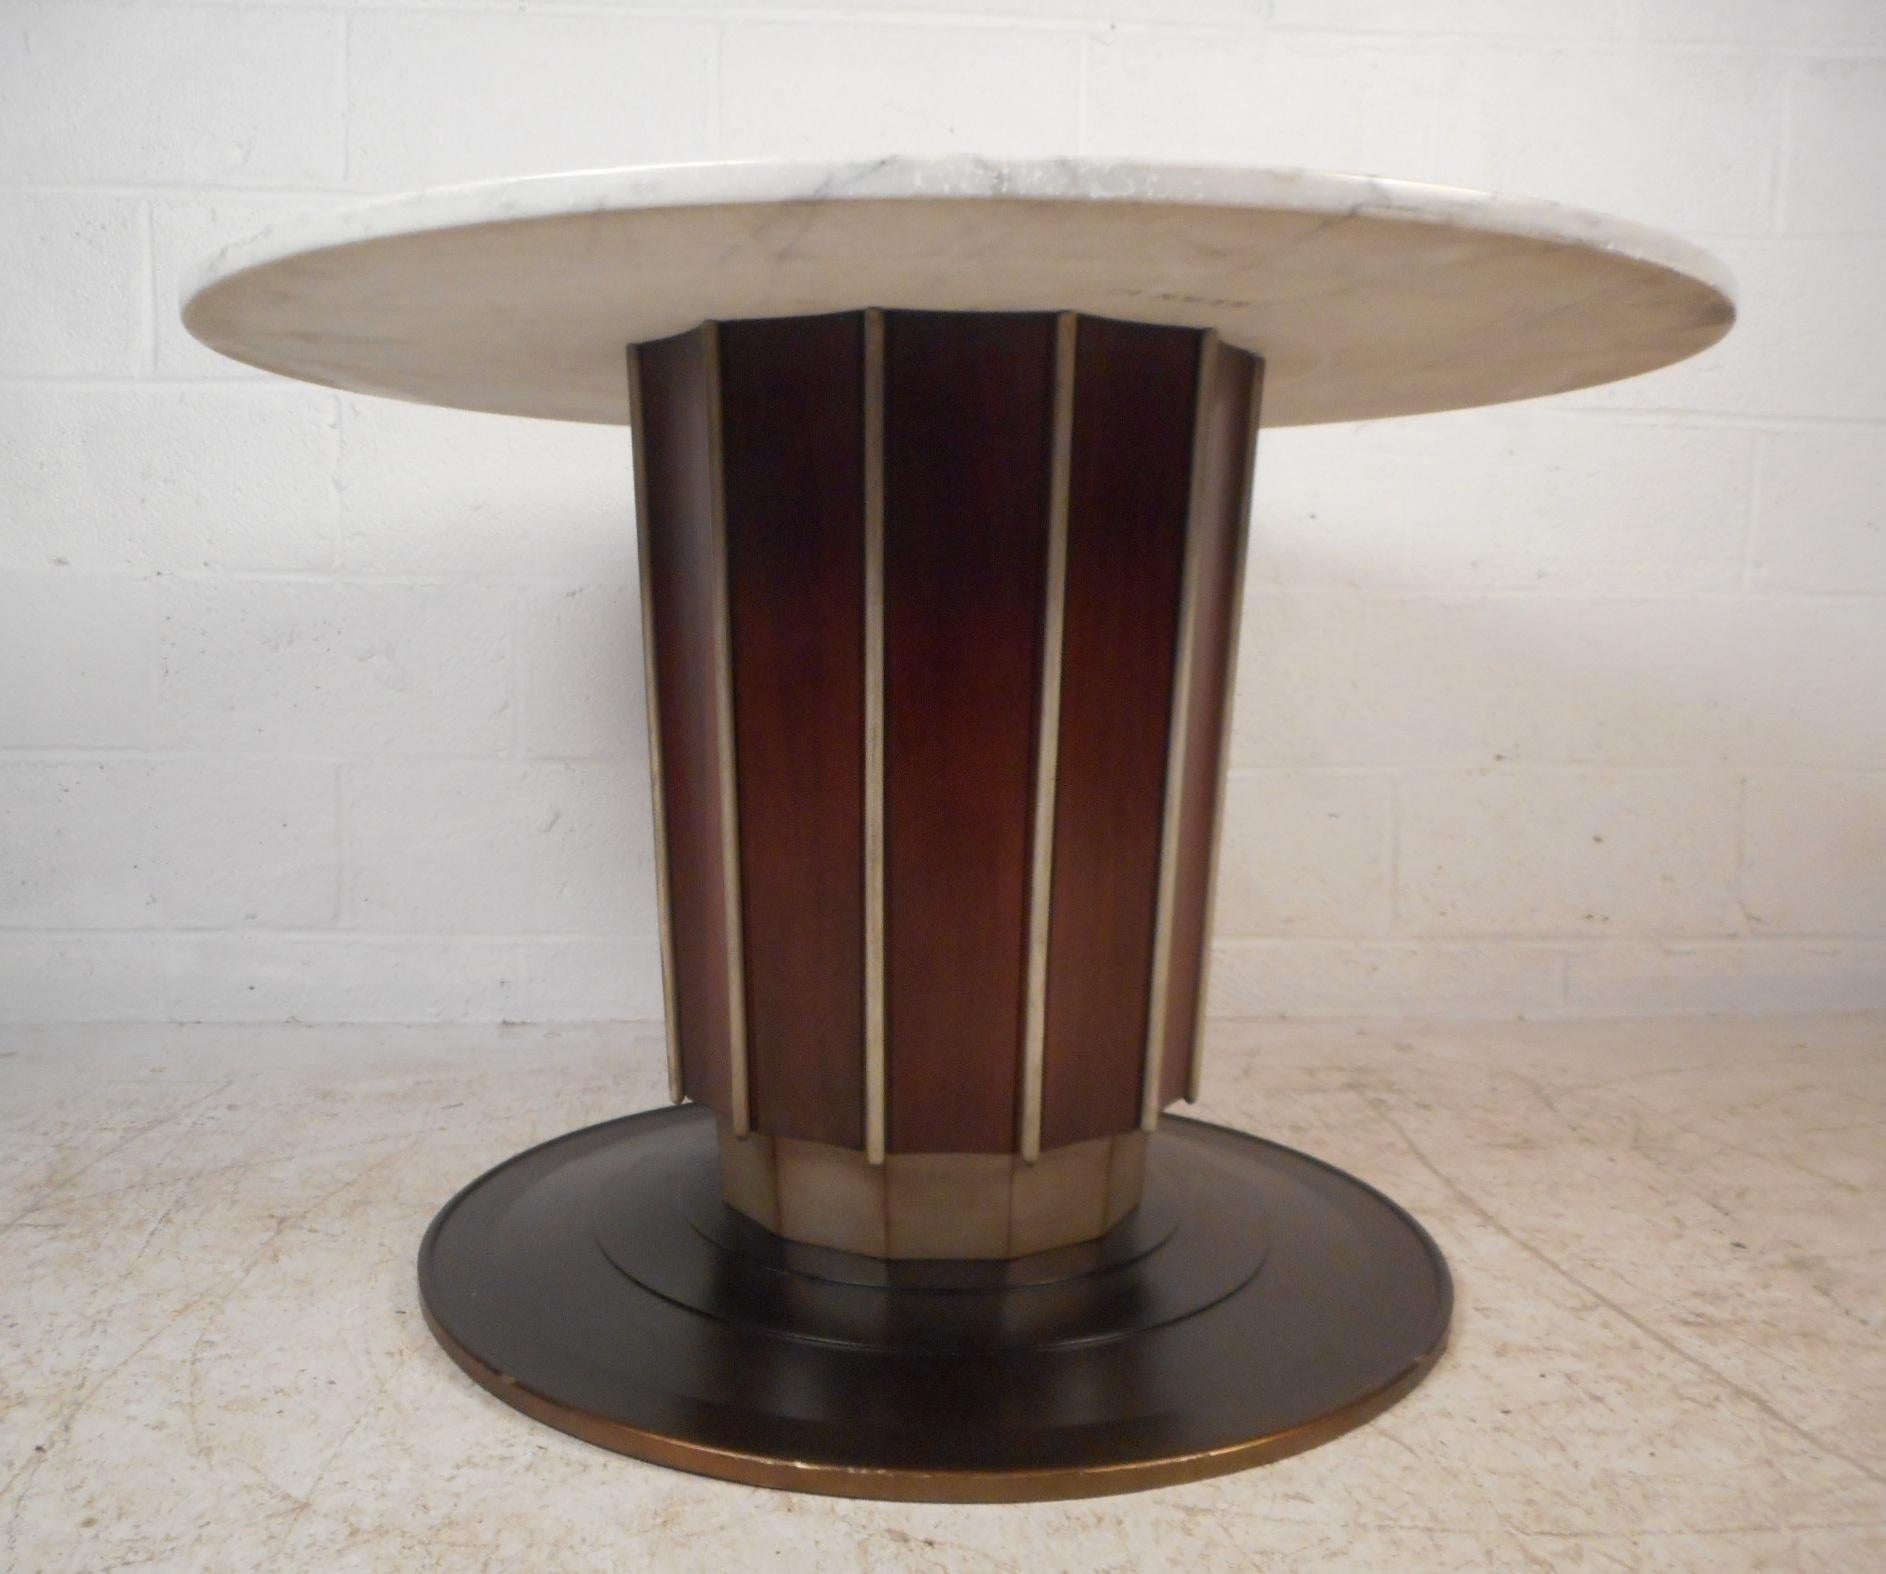 This stunning Mid-Century Modern kitchen table features a round white marble top on a pedestal base. The stylish pedestal base boasts walnut veneer with vertical accents. An elegant design that makes the perfect showpiece in any setting. Please